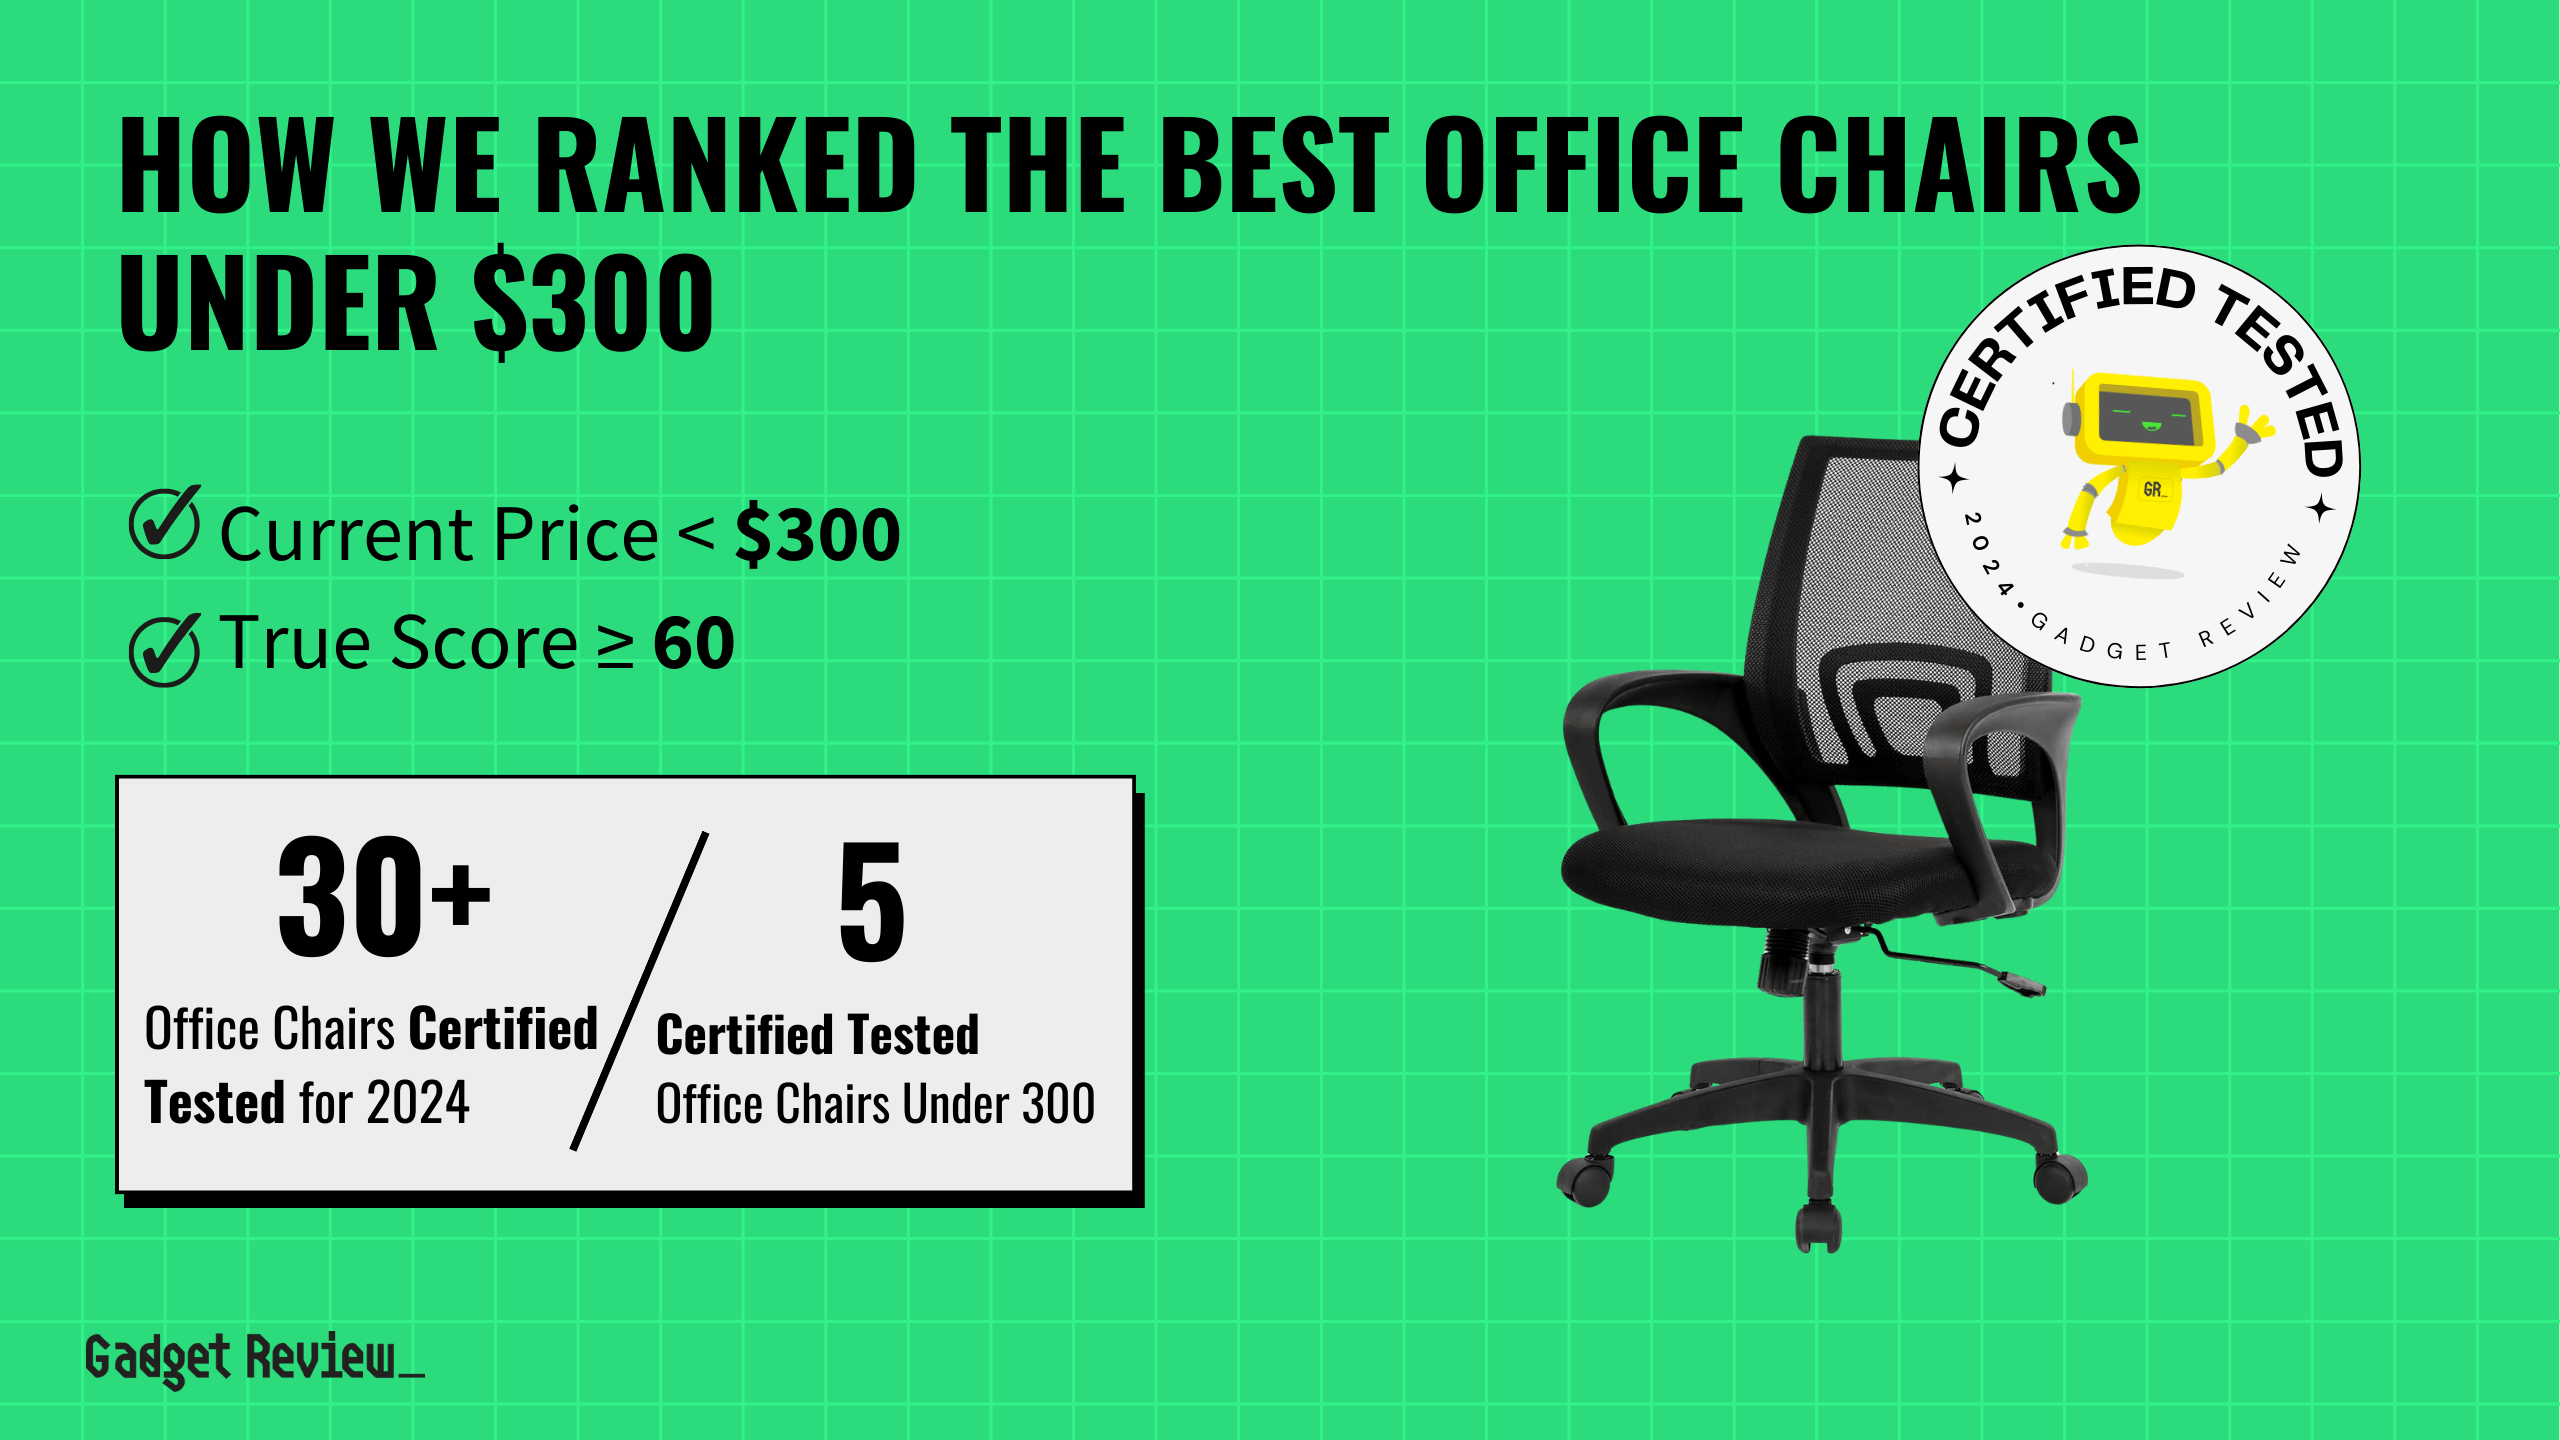 How We Ranked The 5 Best Office Chairs Under $300